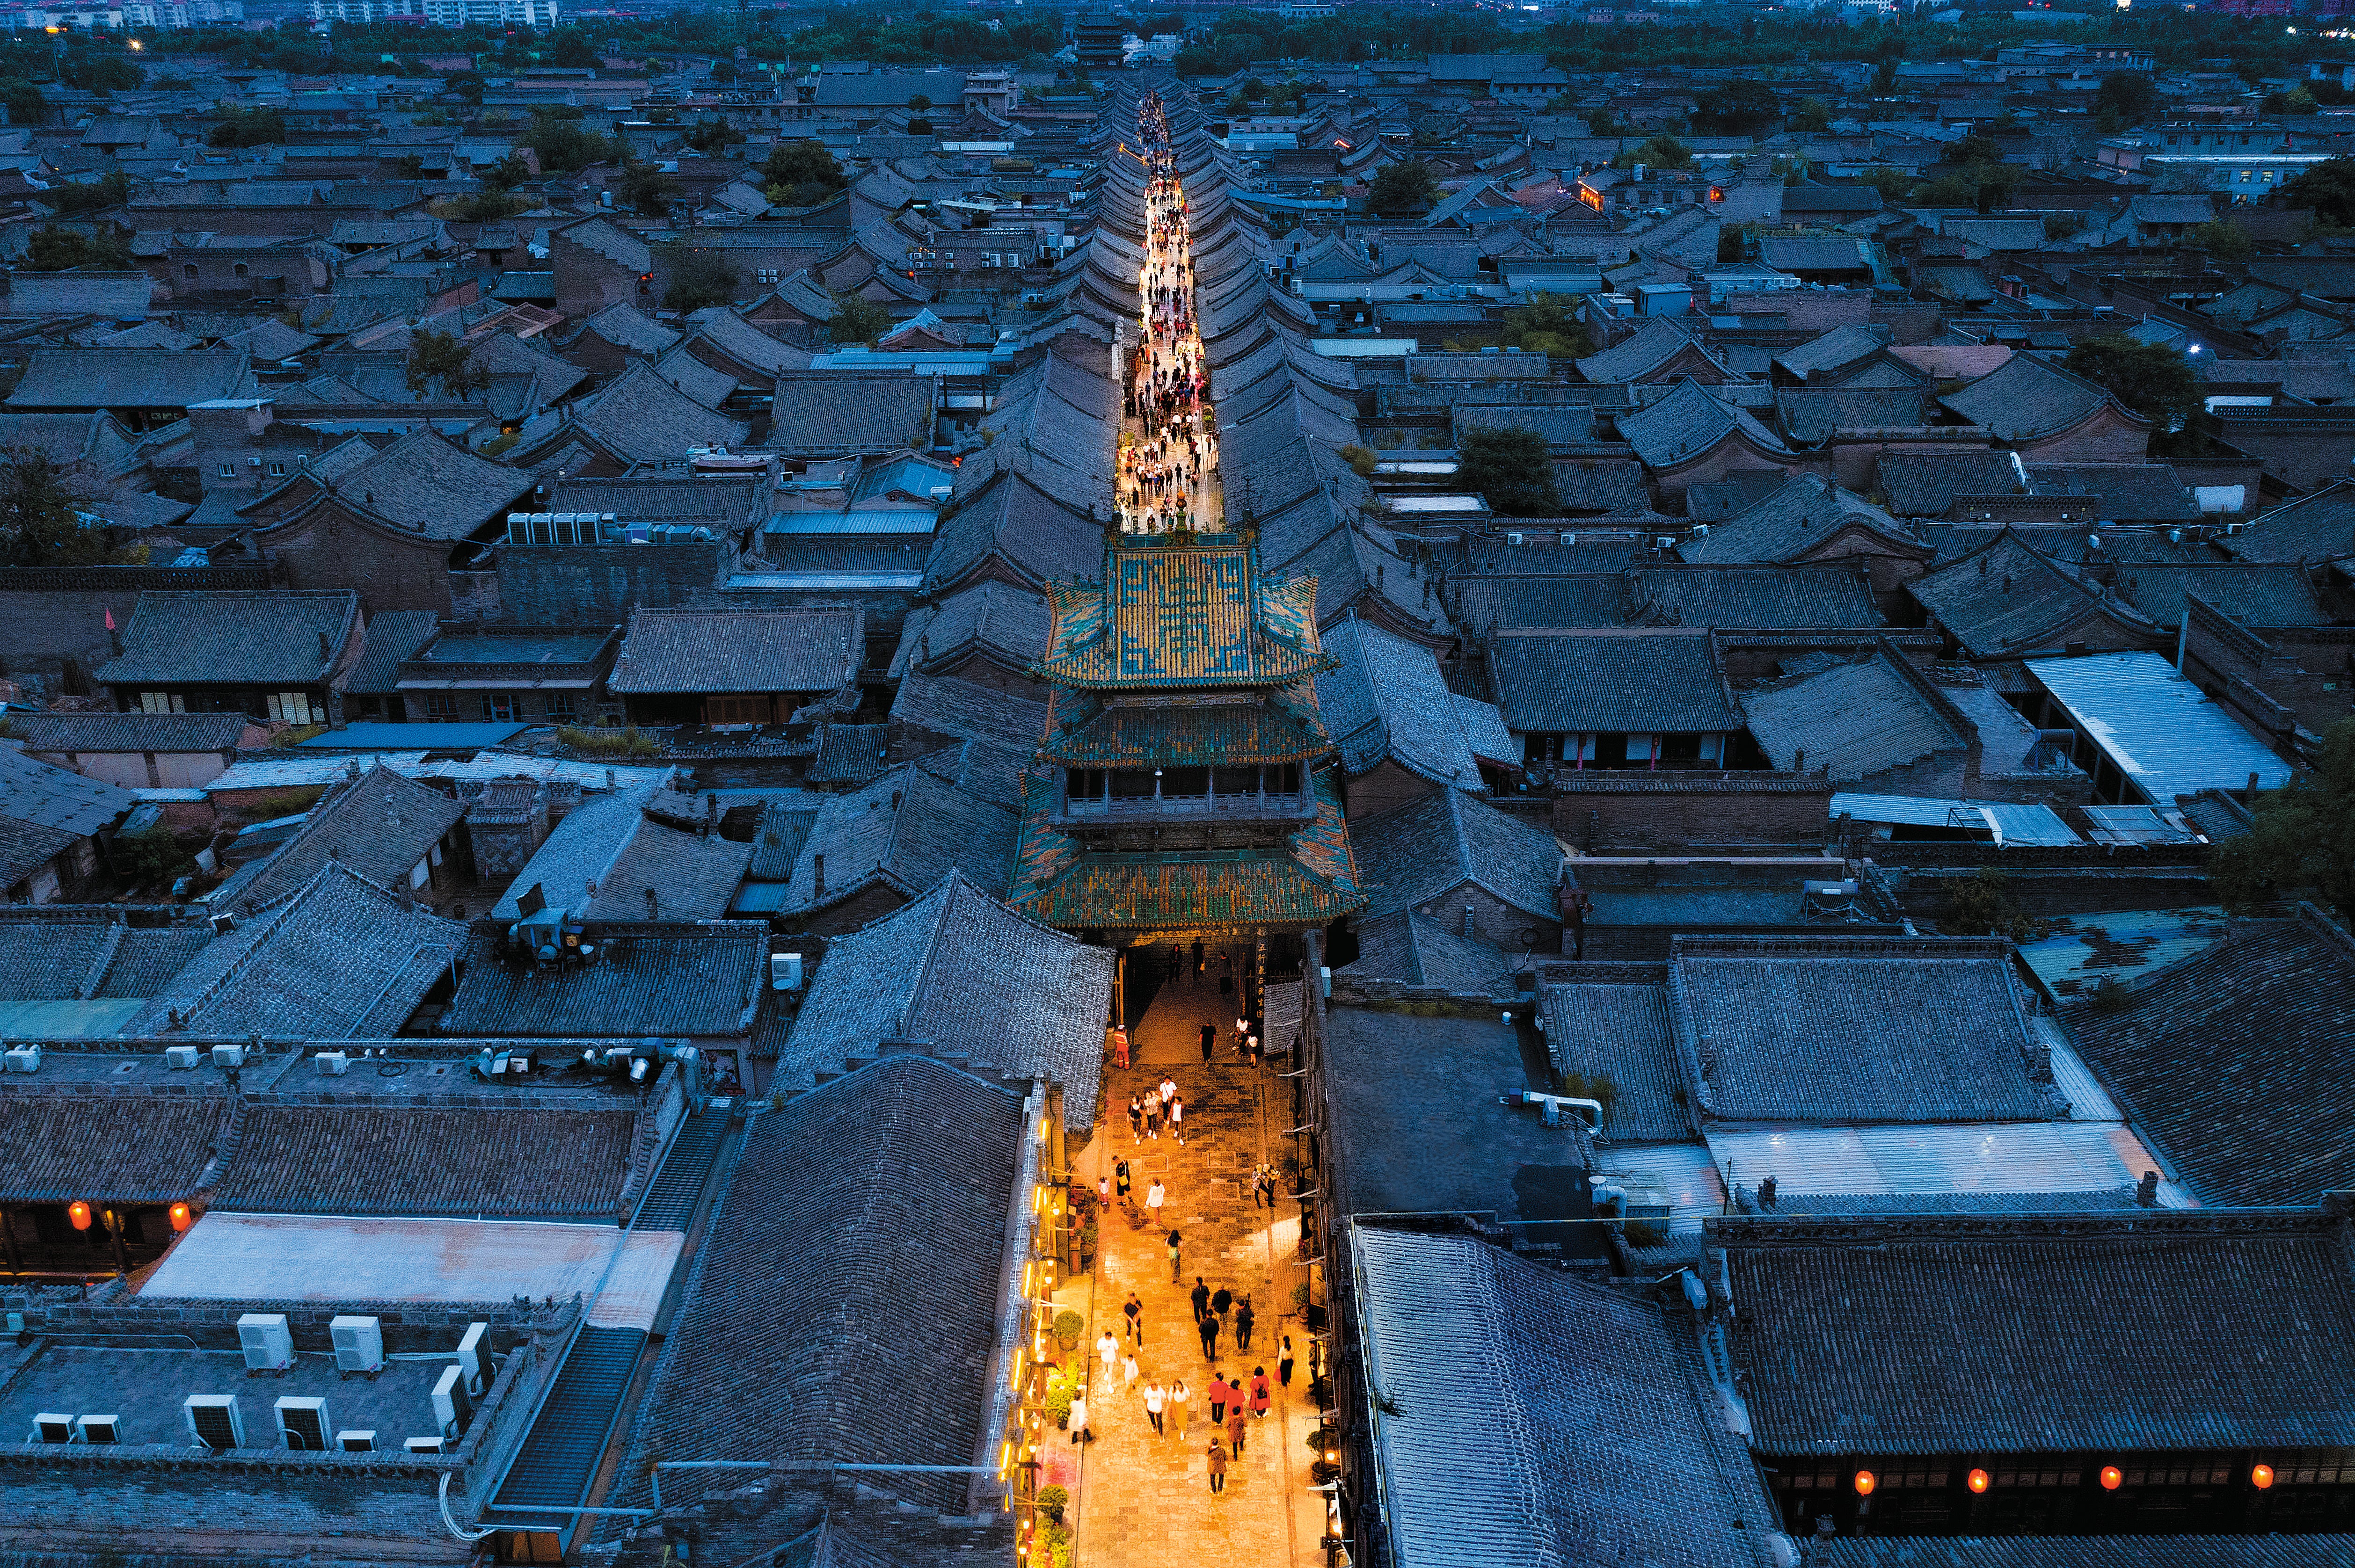 A maze of grey-tiled rooftops is an iconic sight in the ancient town of Pingyao in Shanxi province